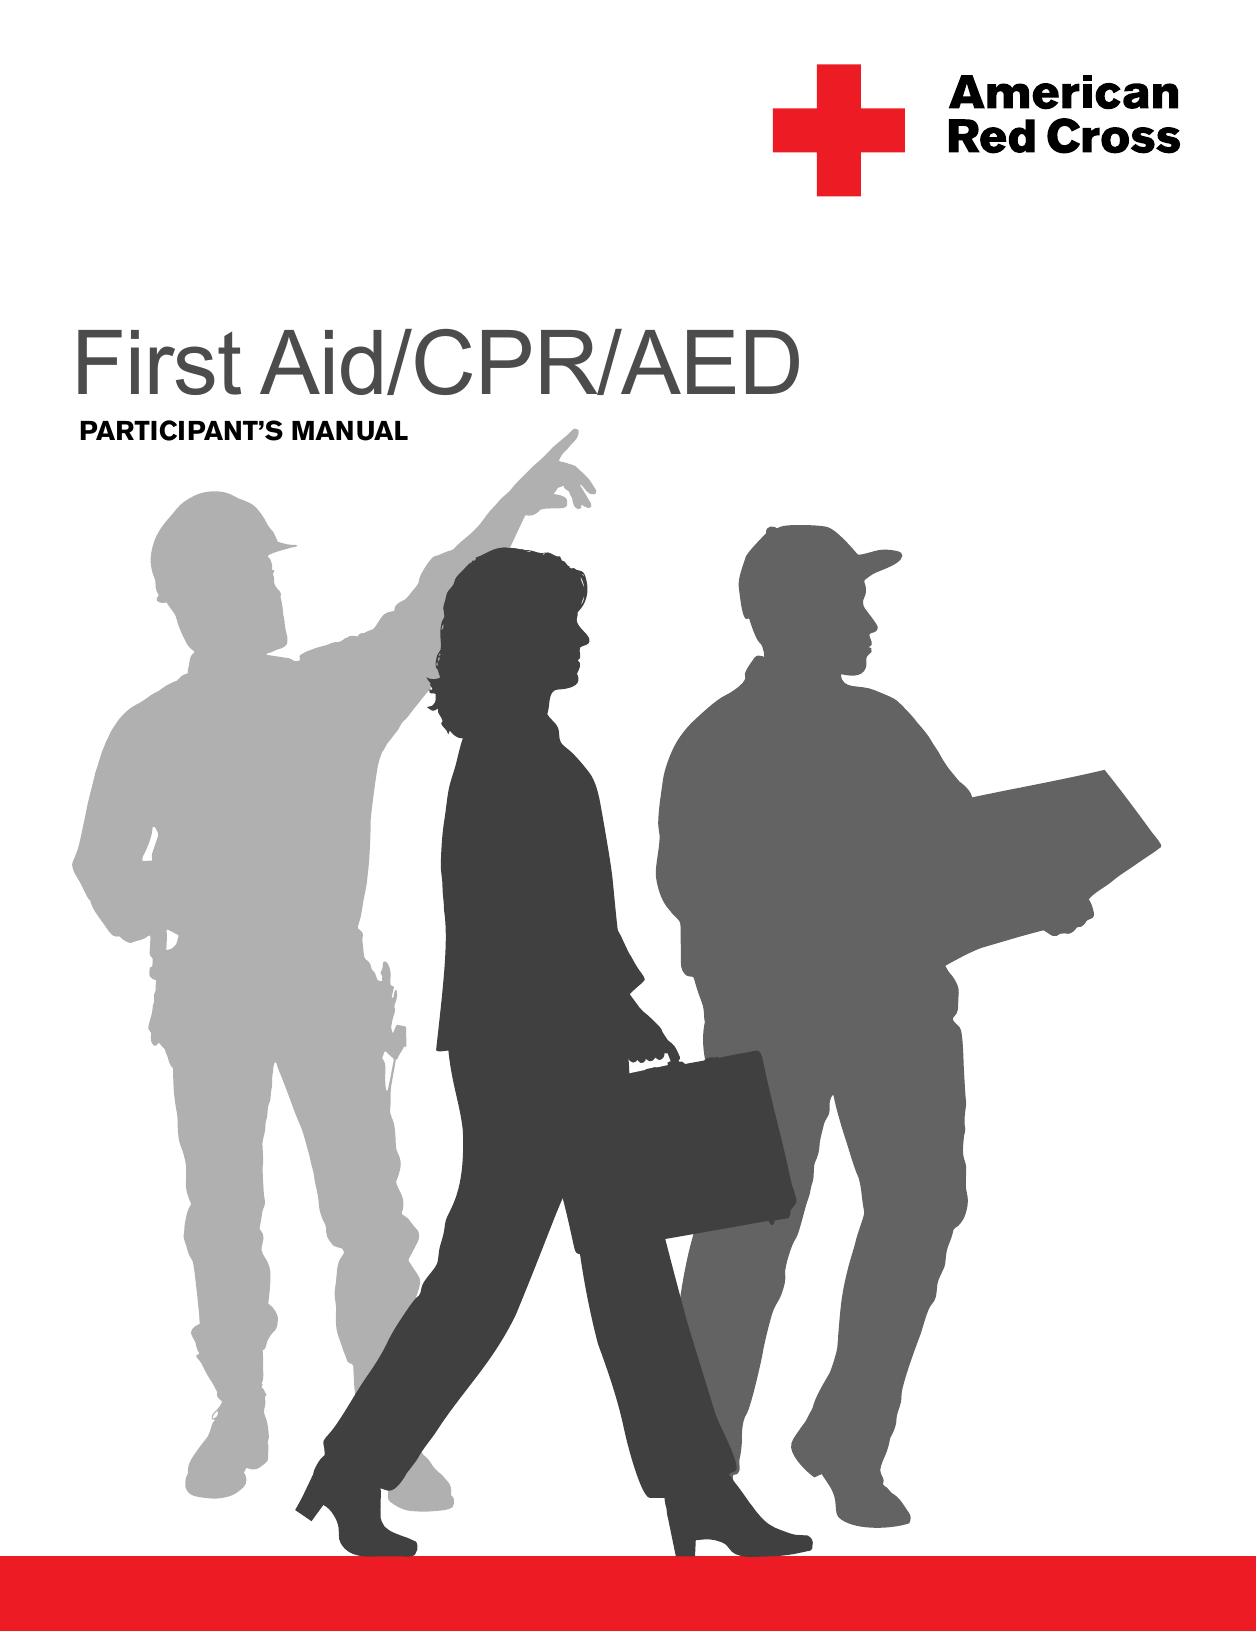 1st aid CPR AED part. manual (kineisology) 2011